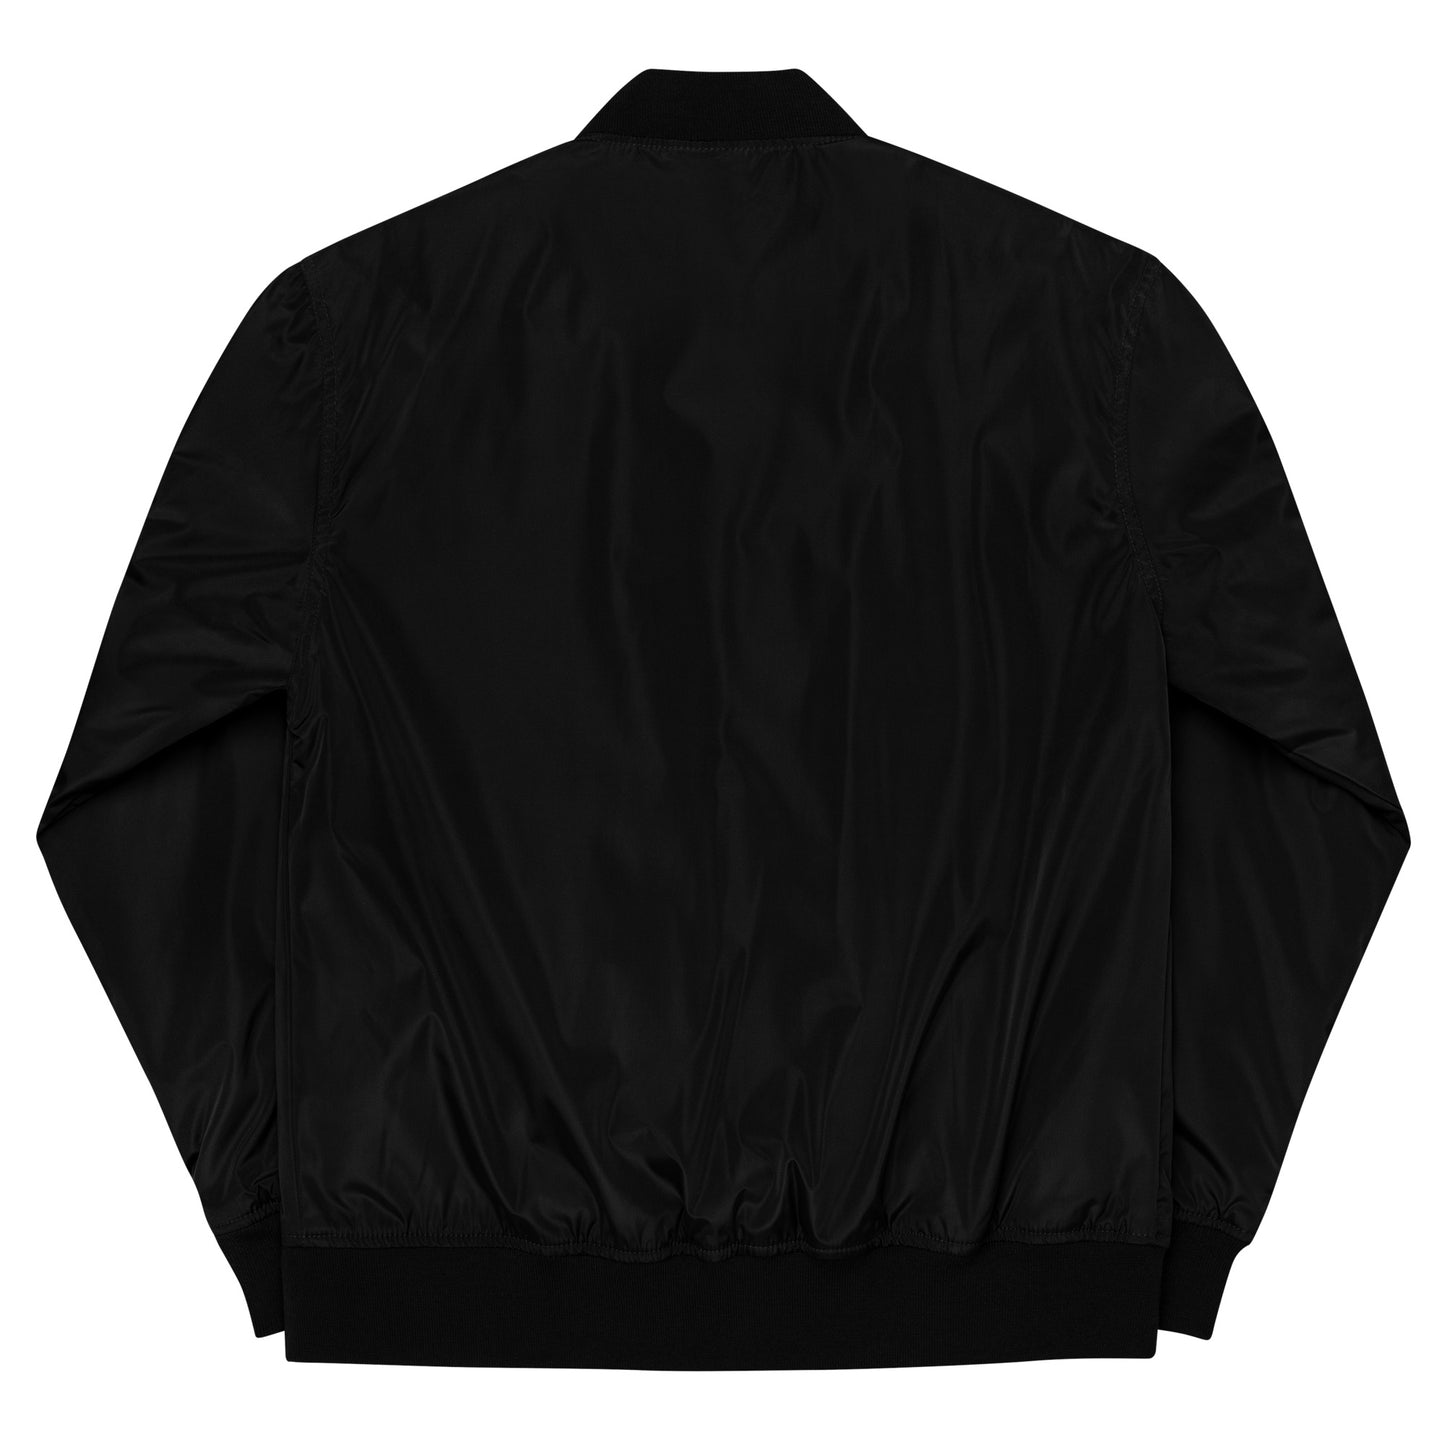 100% recycled polyester Bomber. (Unisex)